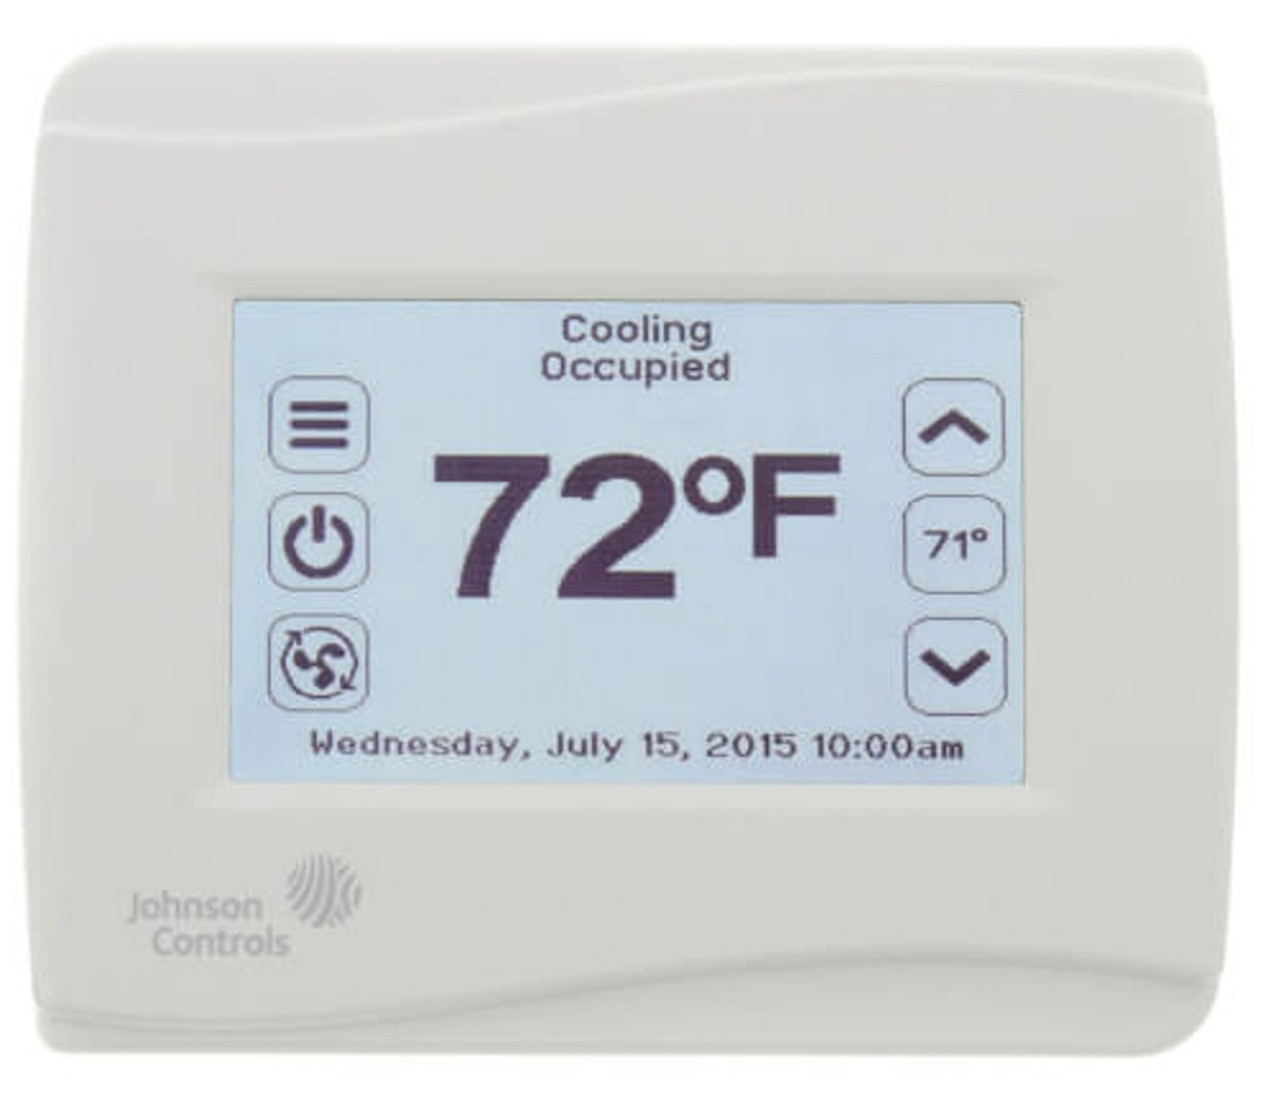 Johnson Controls TEC3620-00-000 TEC3000 BACnet N2 Networked Thermostat Control [New]